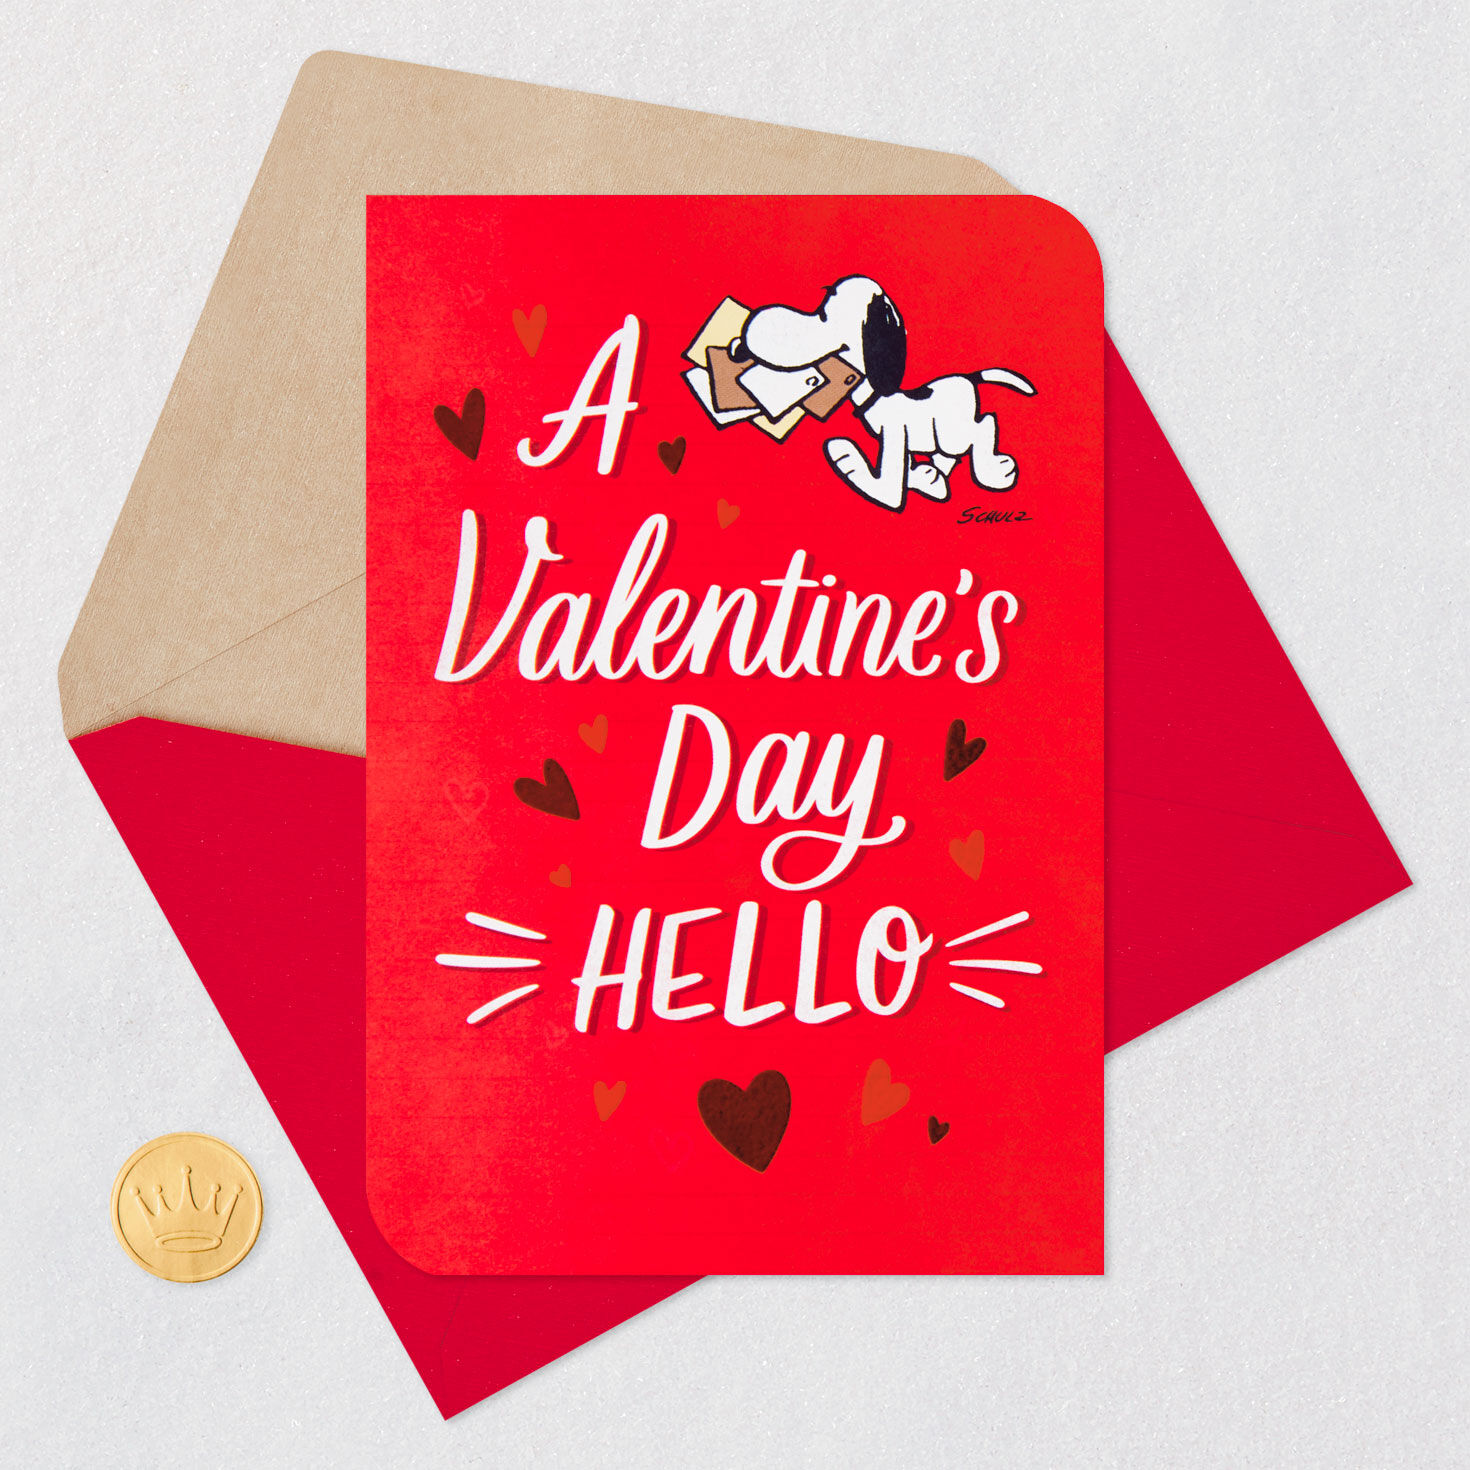 Peanuts® Snoopy Sweet Hello Valentine's Day Card for only USD 2.99 | Hallmark